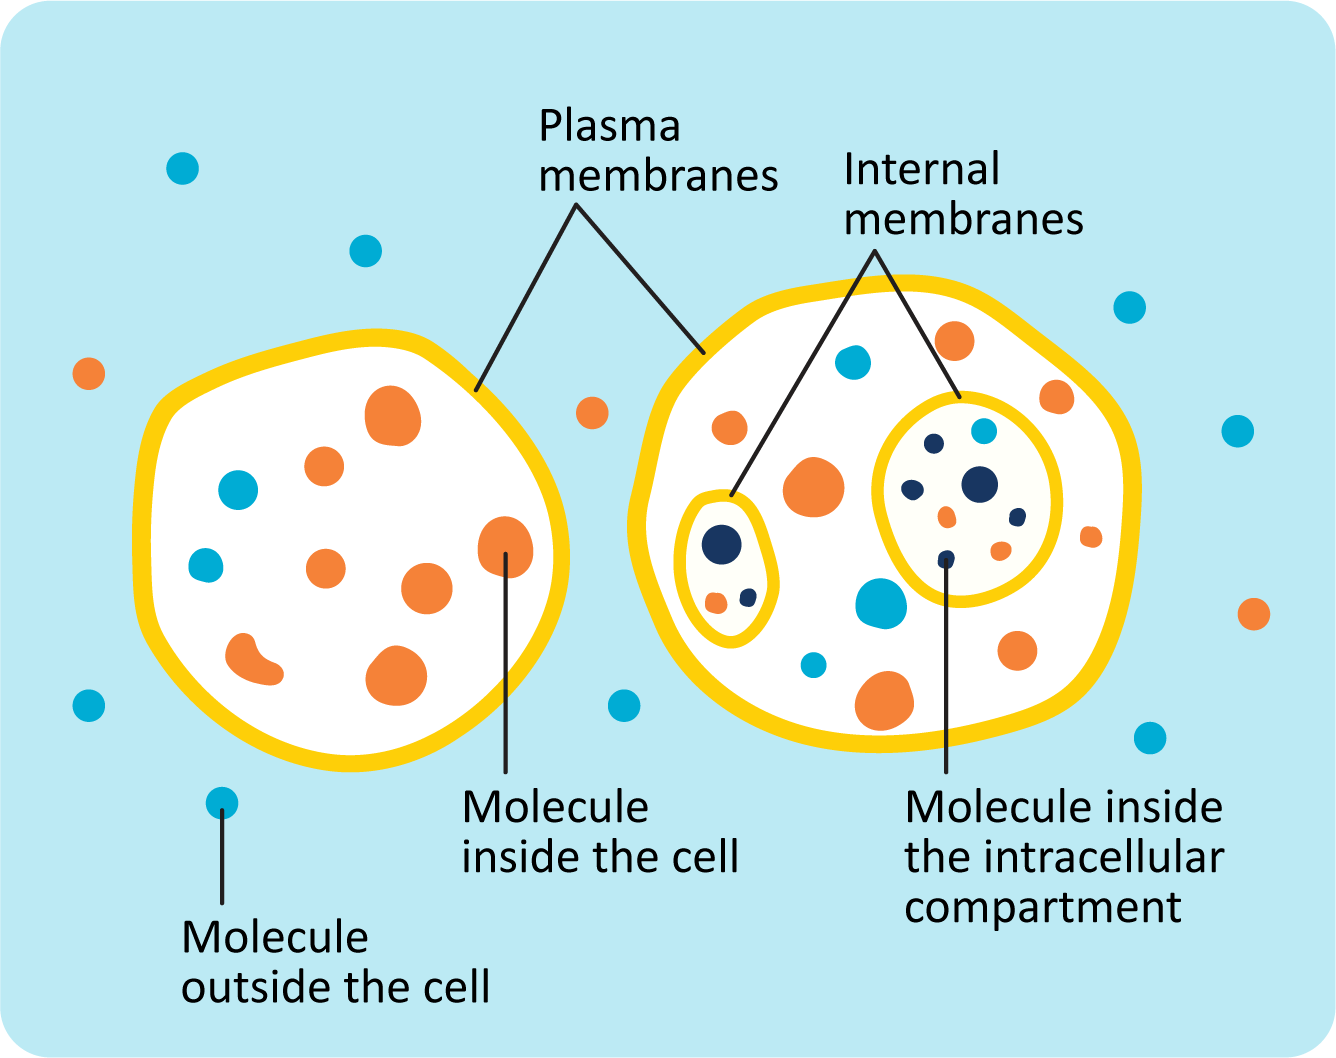 Biological membranes form cellular compartments and act as barriers to separate the inside and outside environments.